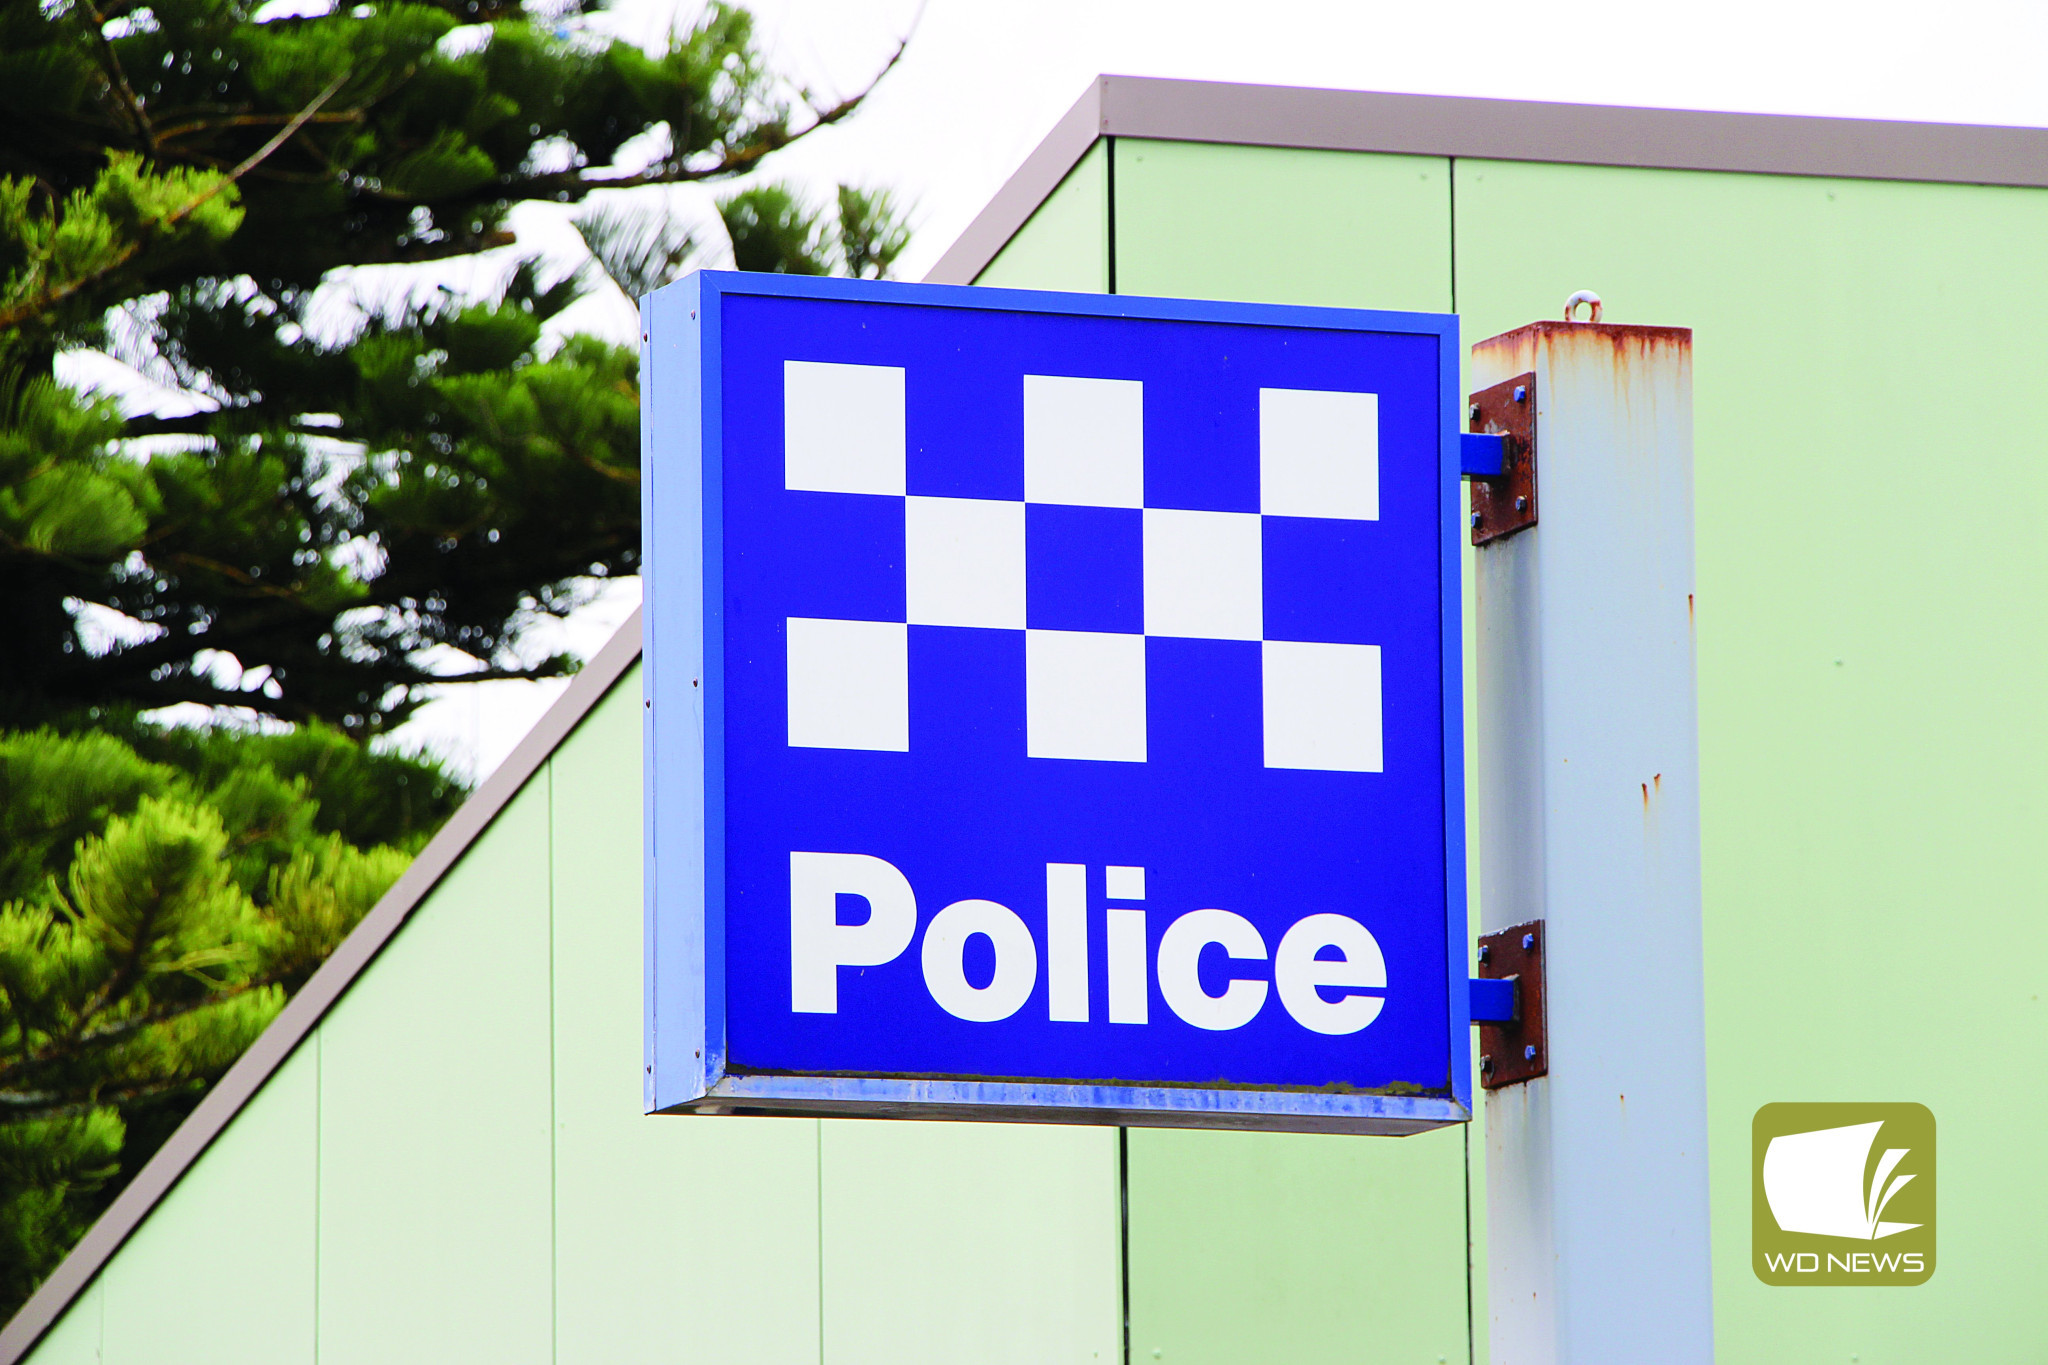 Can you help?: Police have made an appeal for information after an alleged crime spree between Warrnambool and Camperdown overnight last Sunday resulted in three cars being stolen.